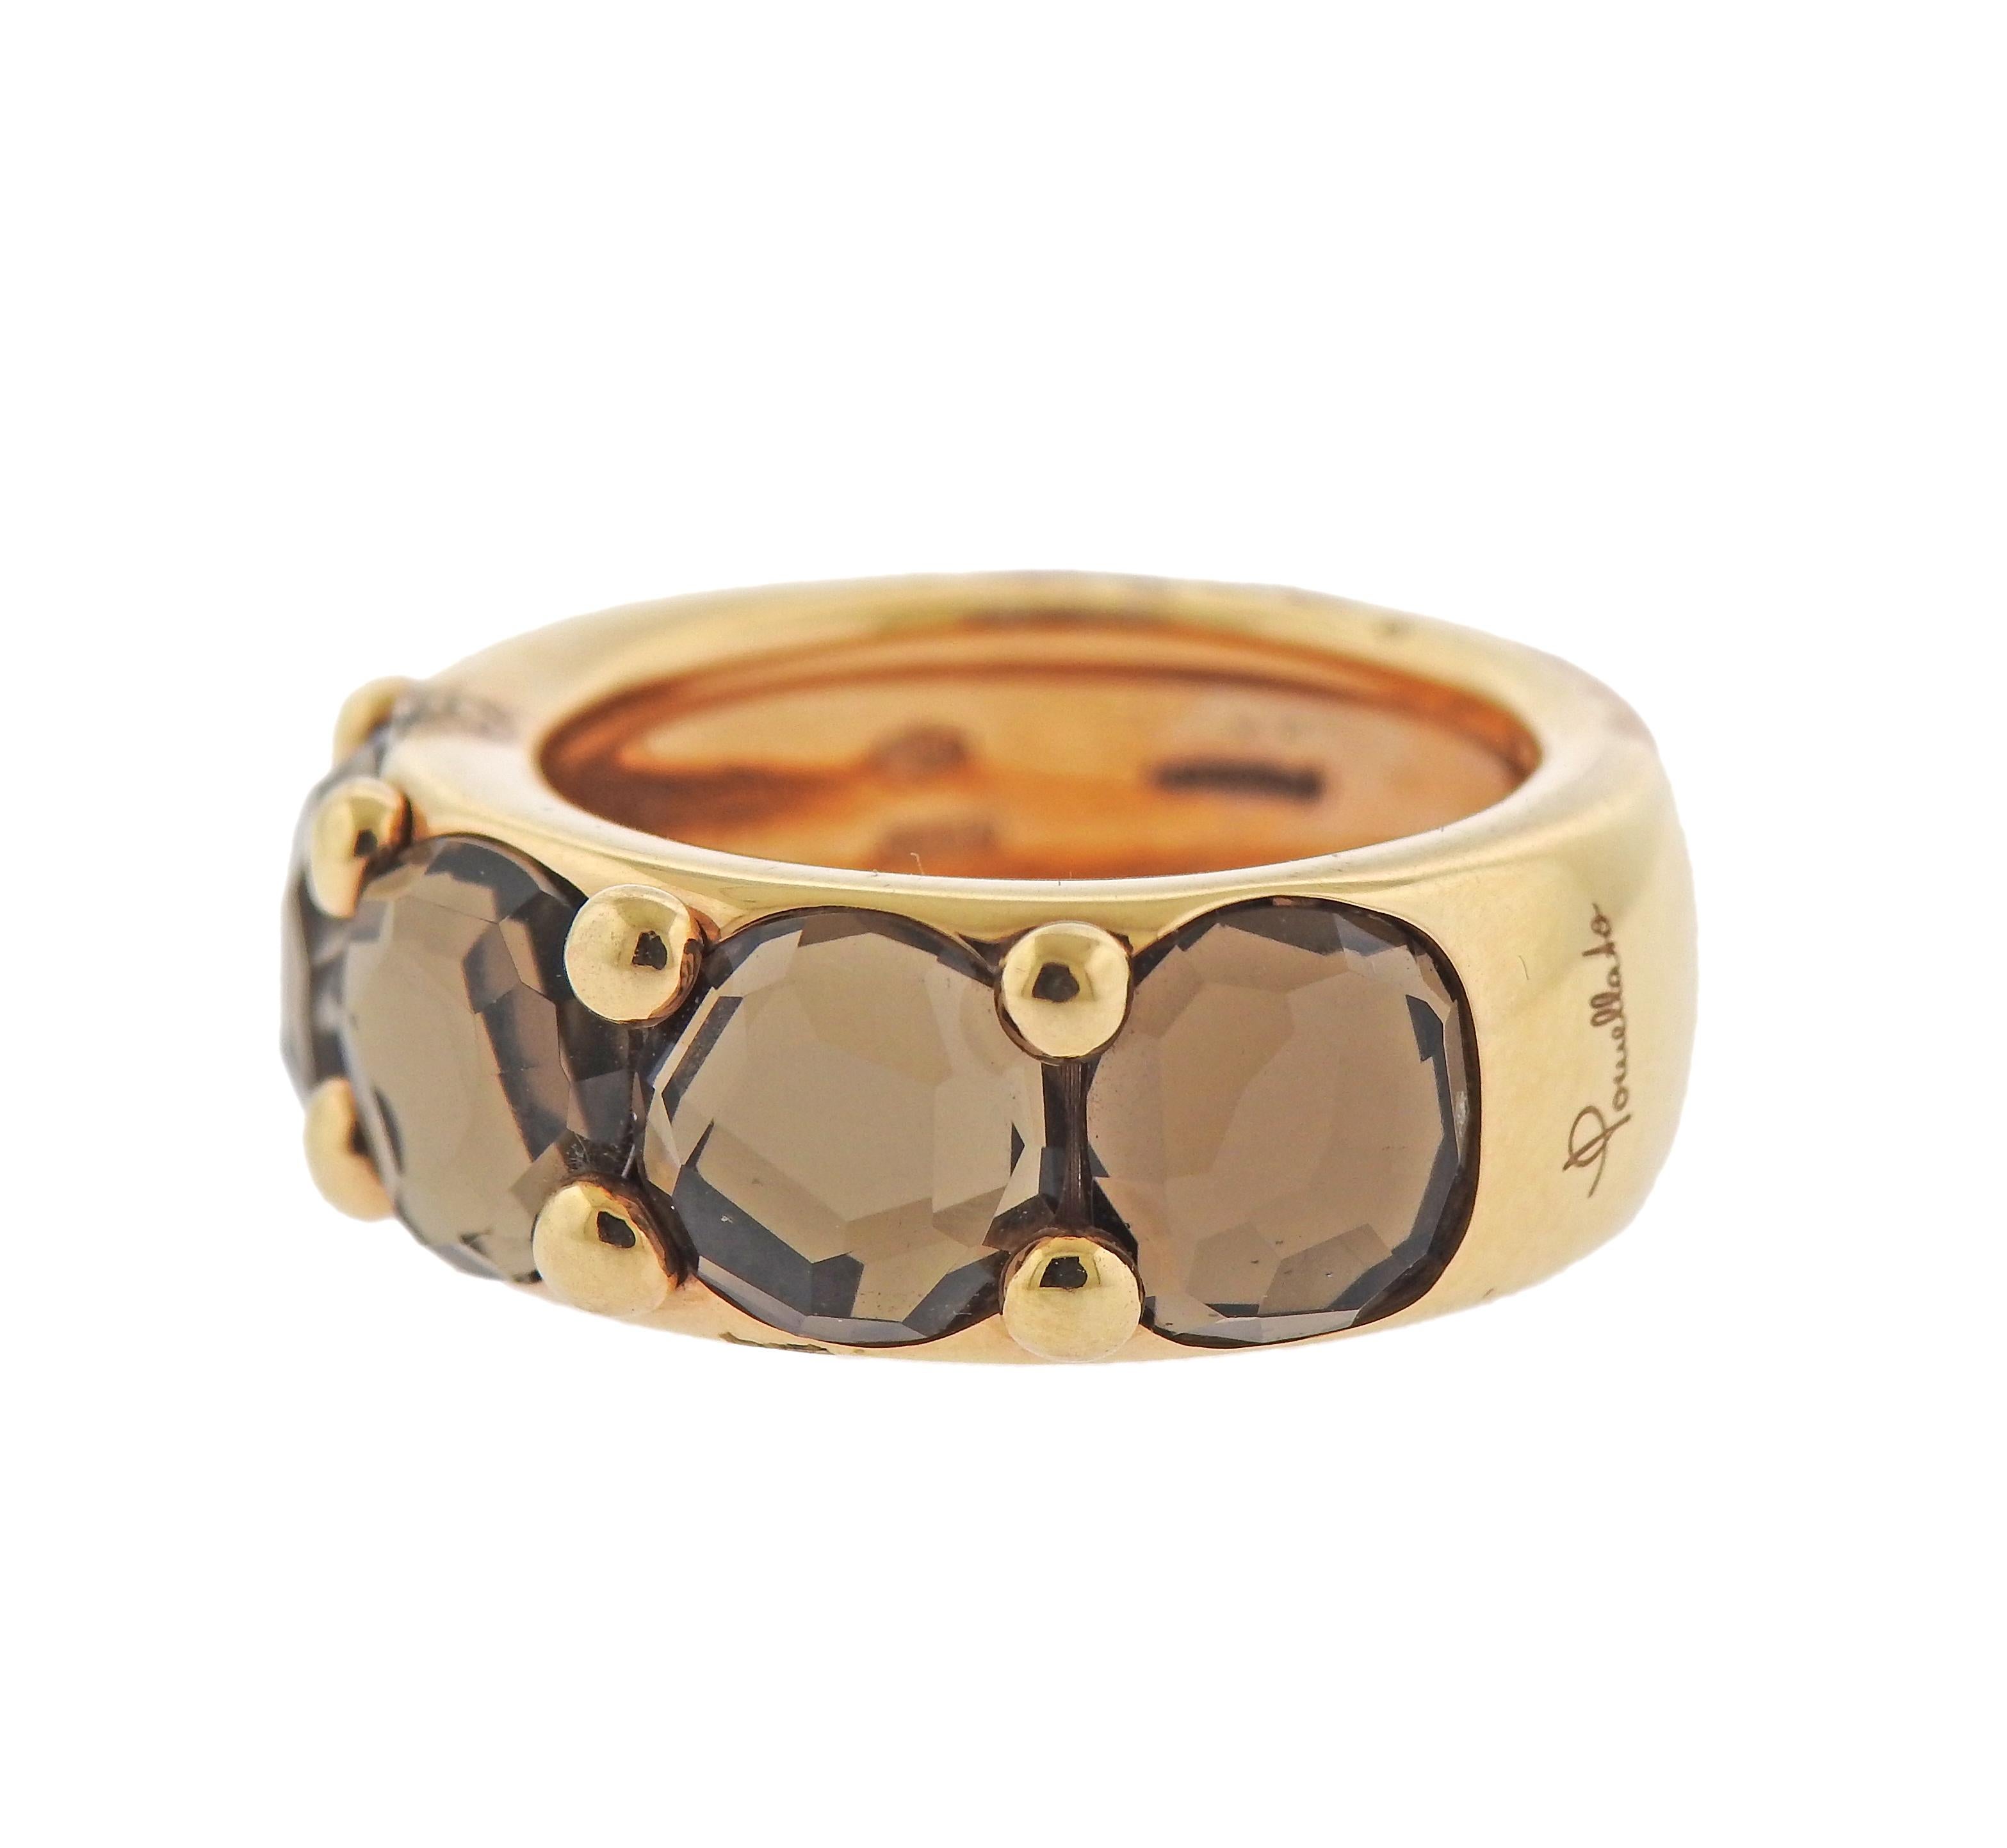 18k gold Narciso ring by Pomellato, with faceted smokey topaz. Ring size - 6.75, ring is 8.5mm wide. Marked: Pomellato, 750, Italian mark and serial number. Weight - 15.8 grams.